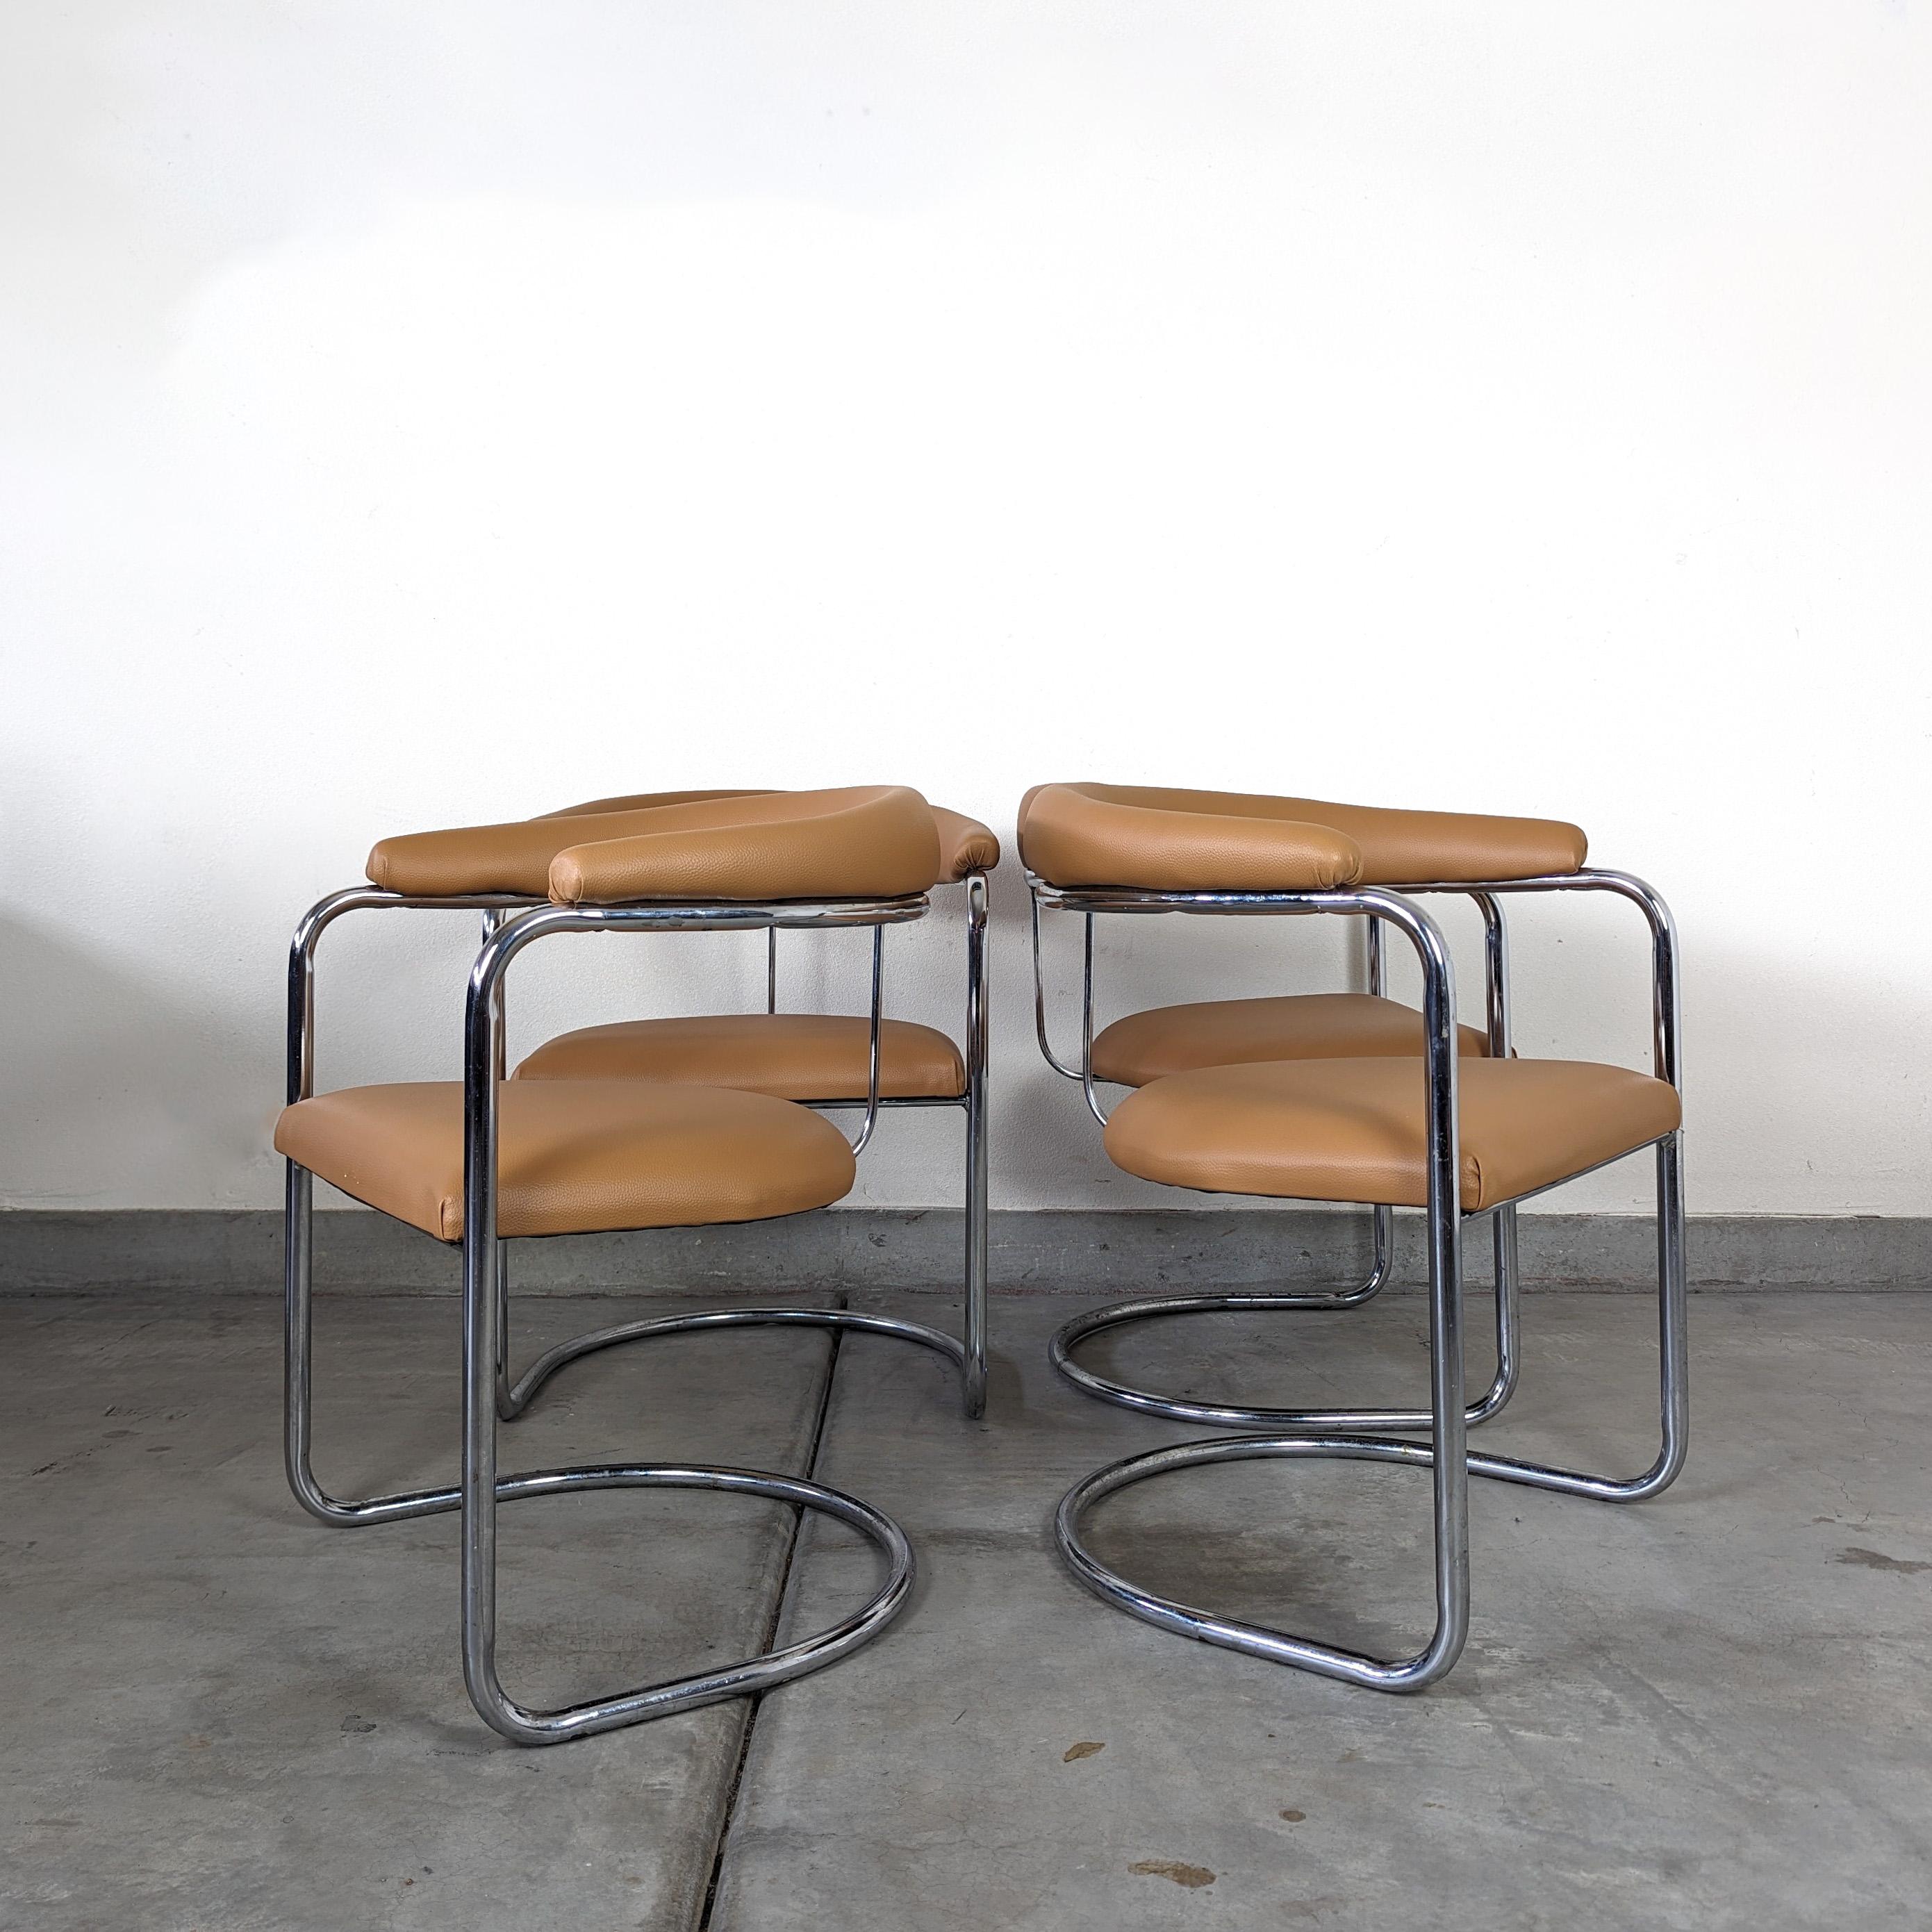 For sale, we have a stunning collection of Mid-Century SS33 Cantilevered Dining Chairs, designed by the legendary Anton Lorenz for Thonet. These chairs are iconic pieces of mid-century modern design, and with their cantilevered structure and tubular